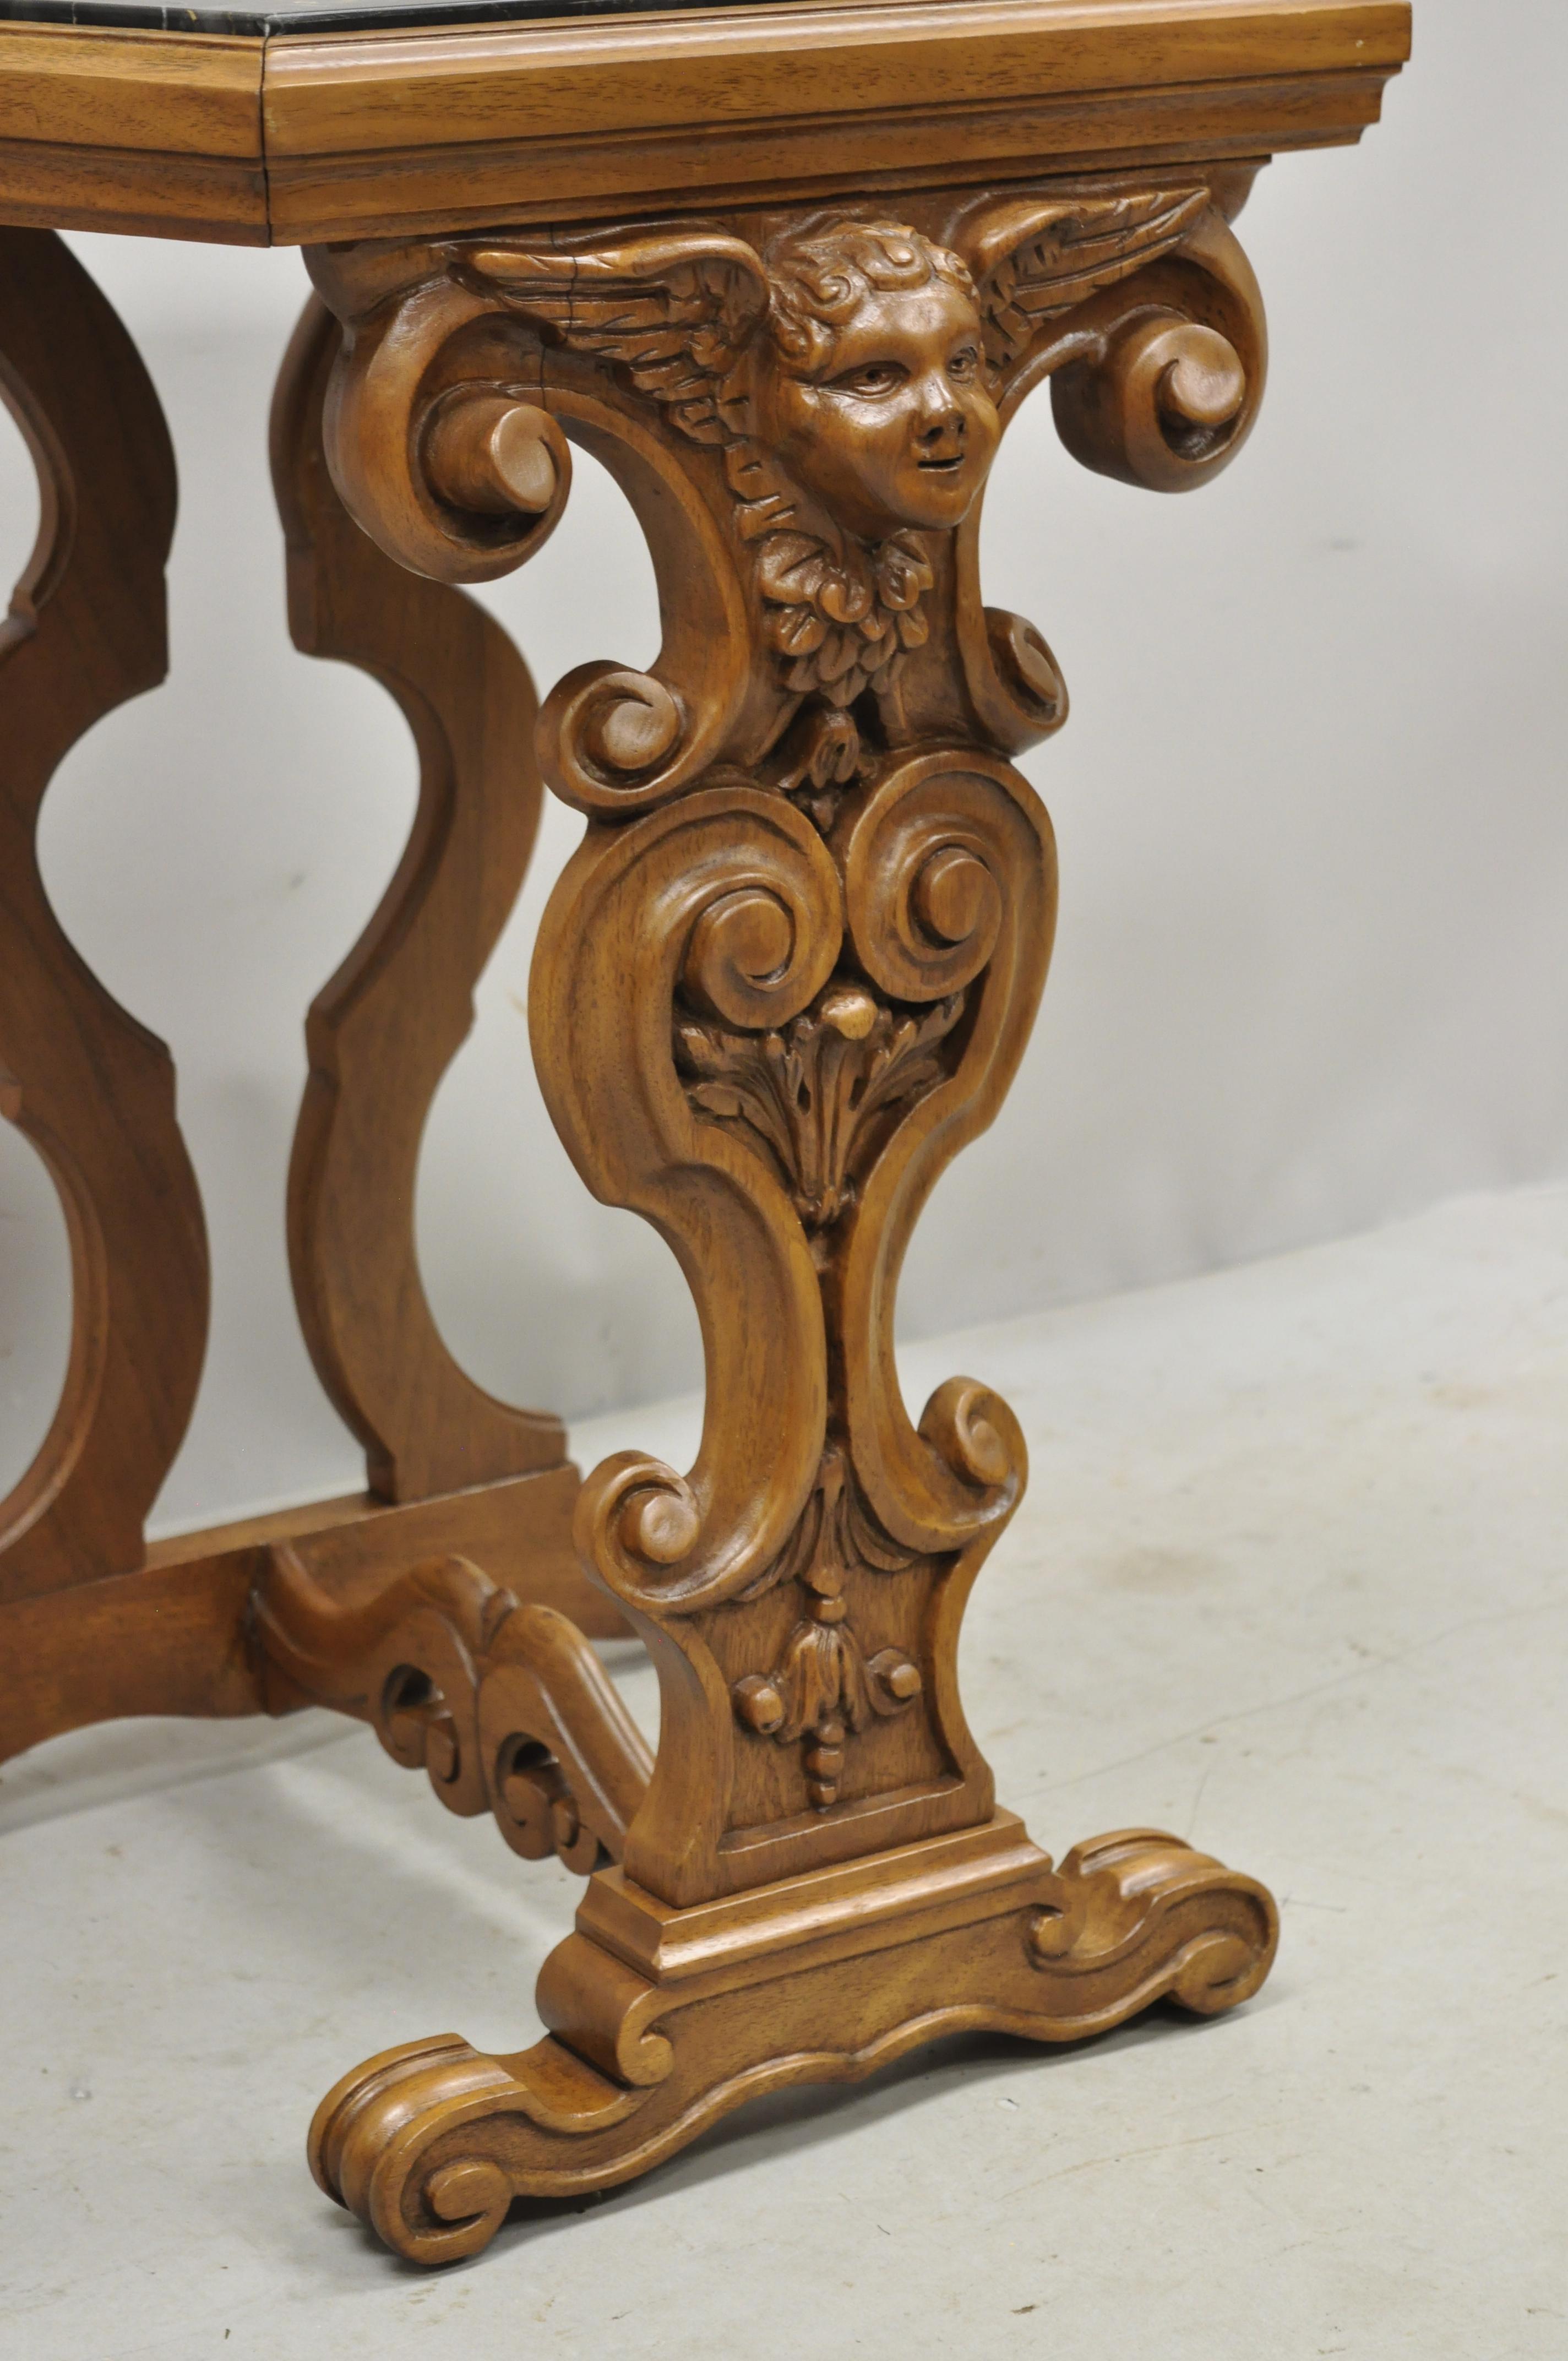 Italian Renaissance Figural Carved Marble Top Side Table with Winged Cherub Head For Sale 2